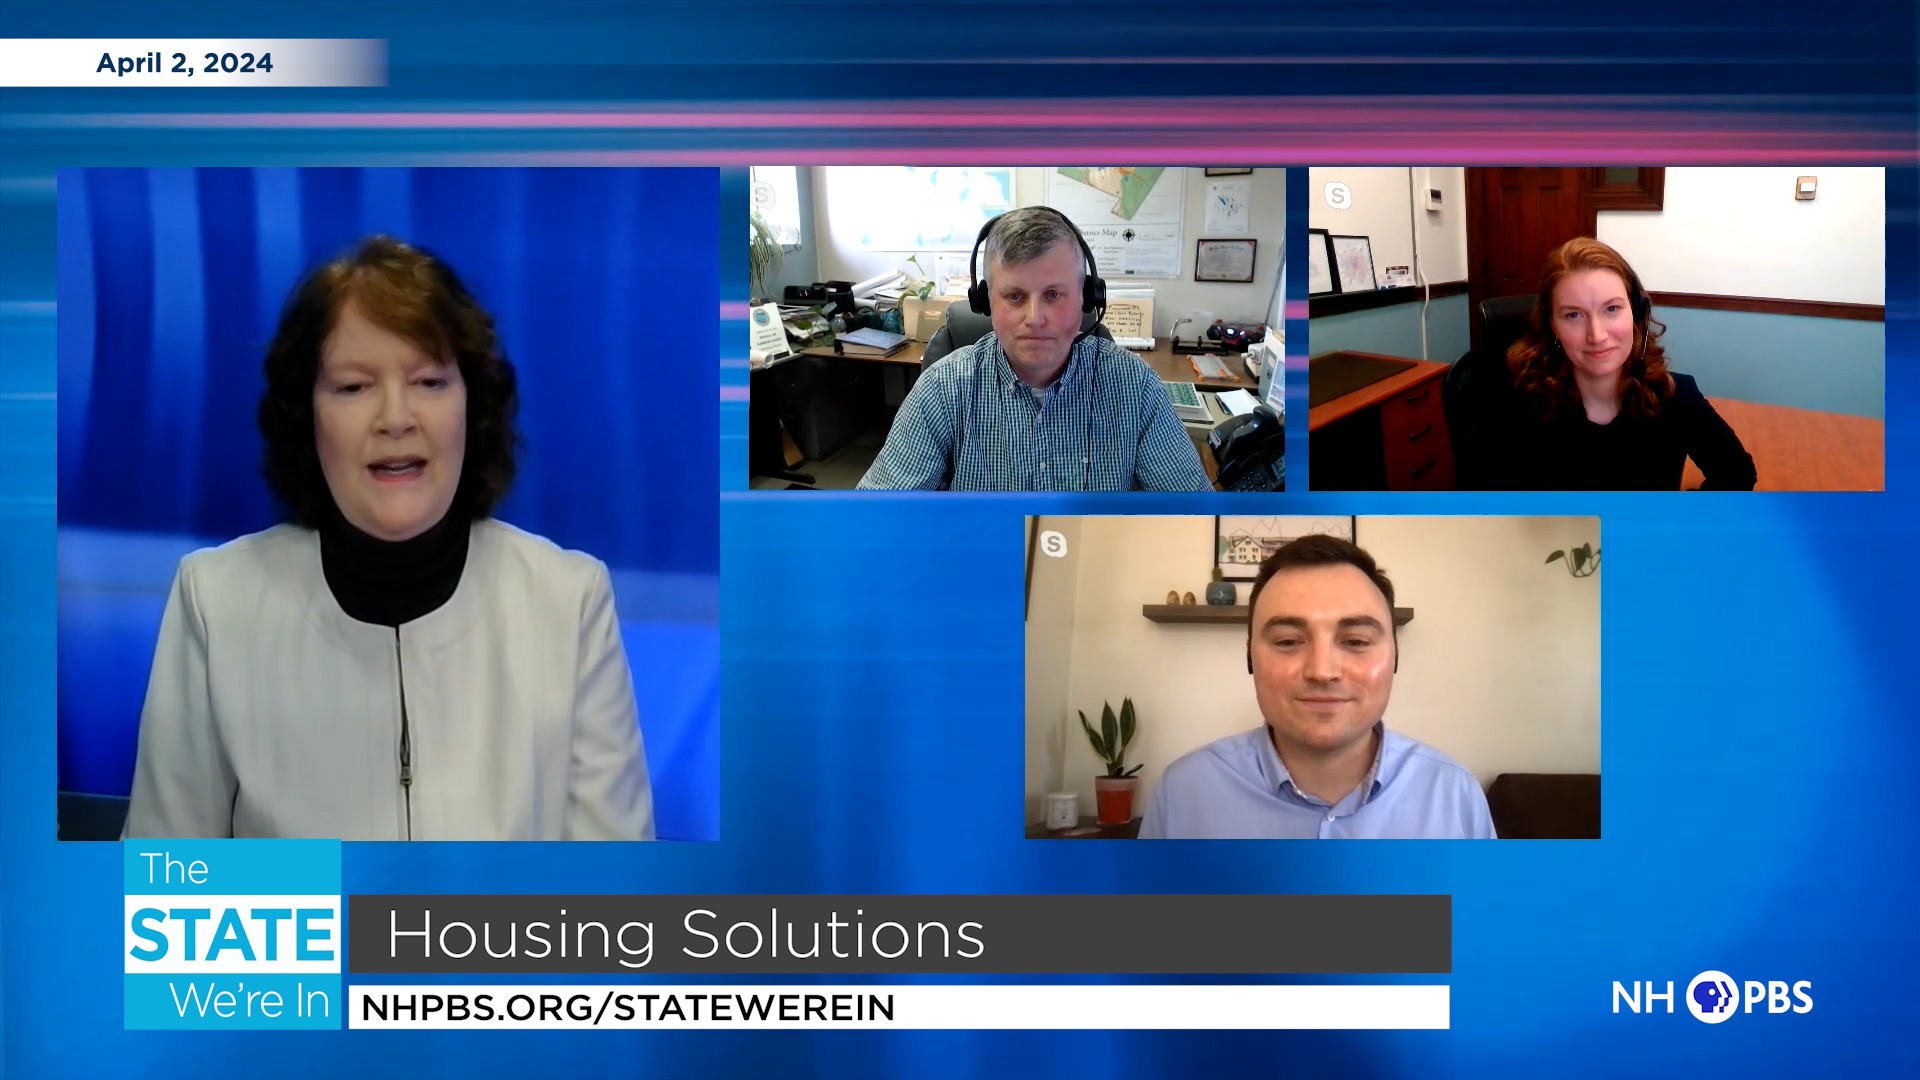 Success Stories Emerge as NH Communities Innovate Housing Crisis Solutions